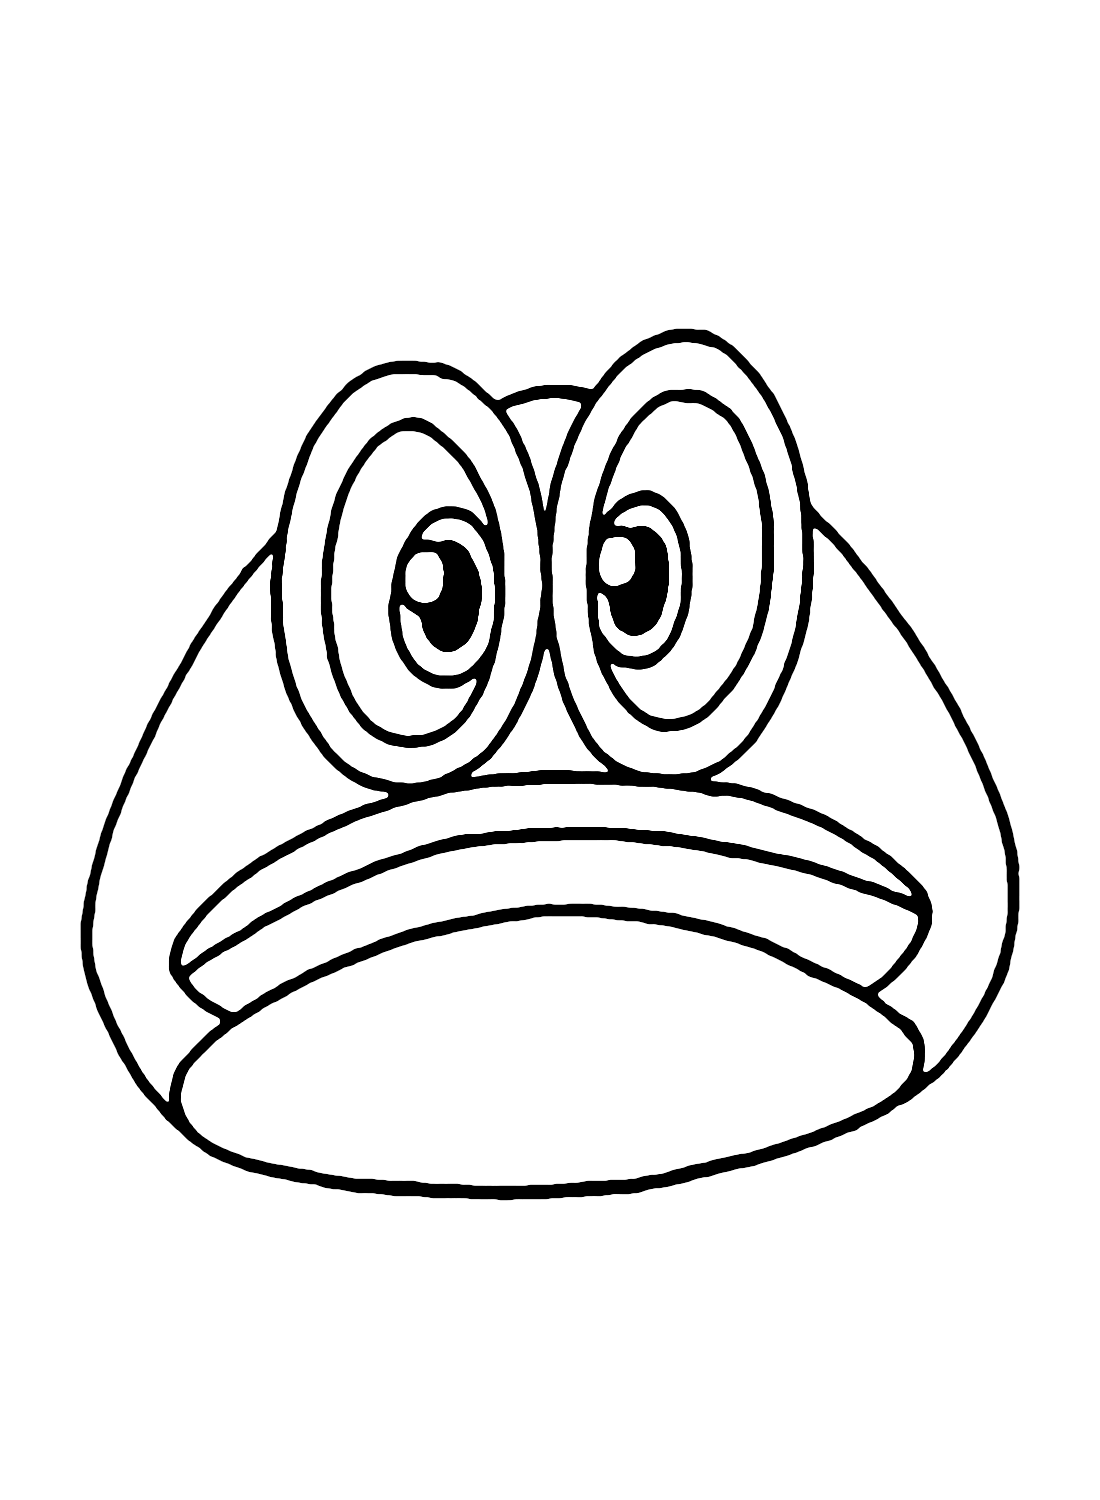 Cappy from Super Mario Odyssey Coloring Page